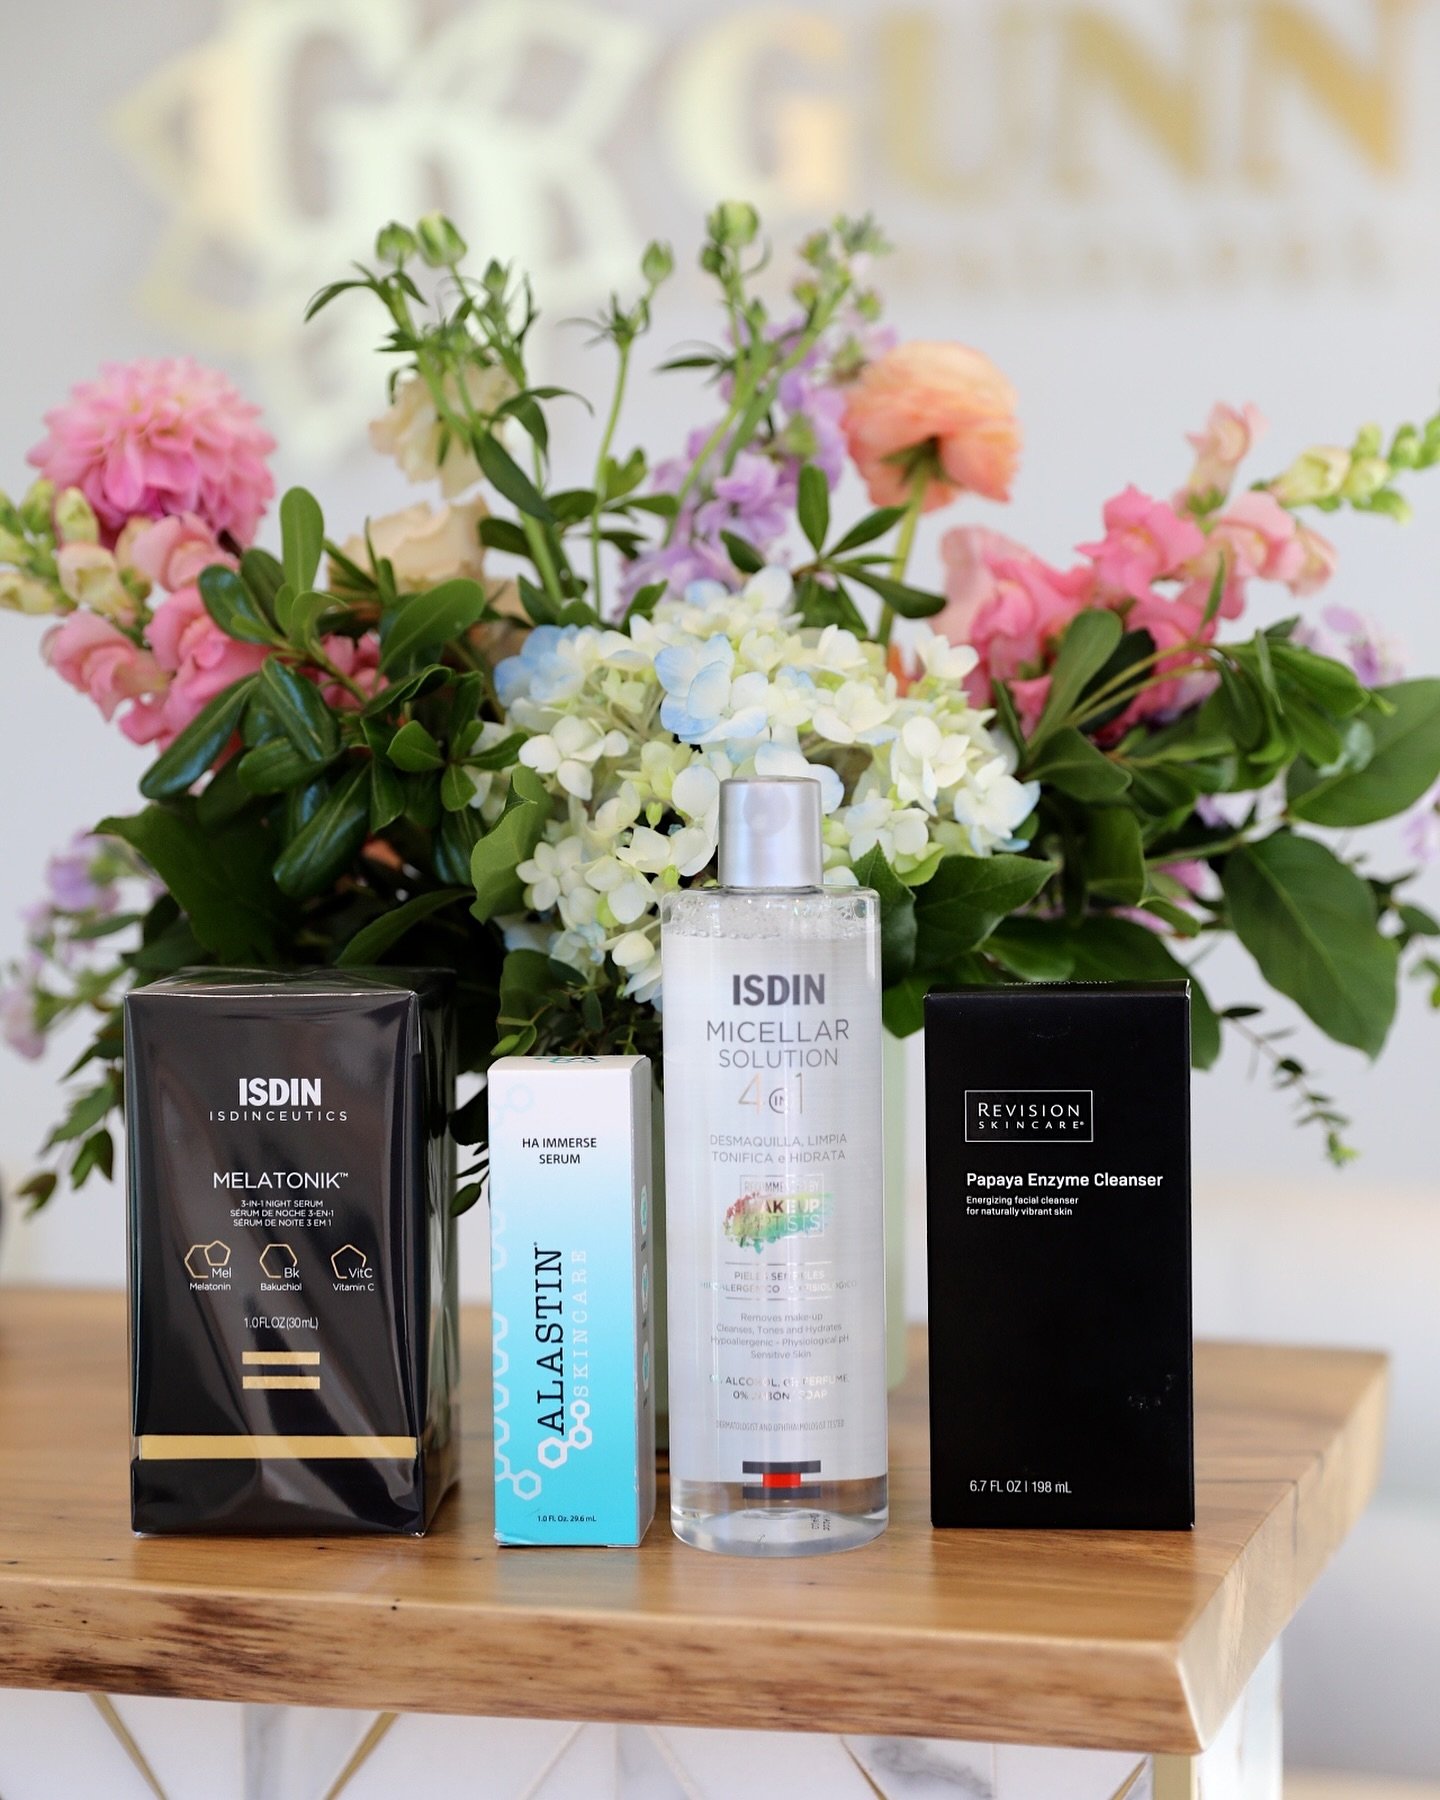 🎁😍Give the gift of glowing skin this Mother&rsquo;s Day! Swing by today for any last minute gifts and our staff will help you pick out the perfect present for Mom! ✨✨ 20% OFF ALL SKINCARE TODAY!